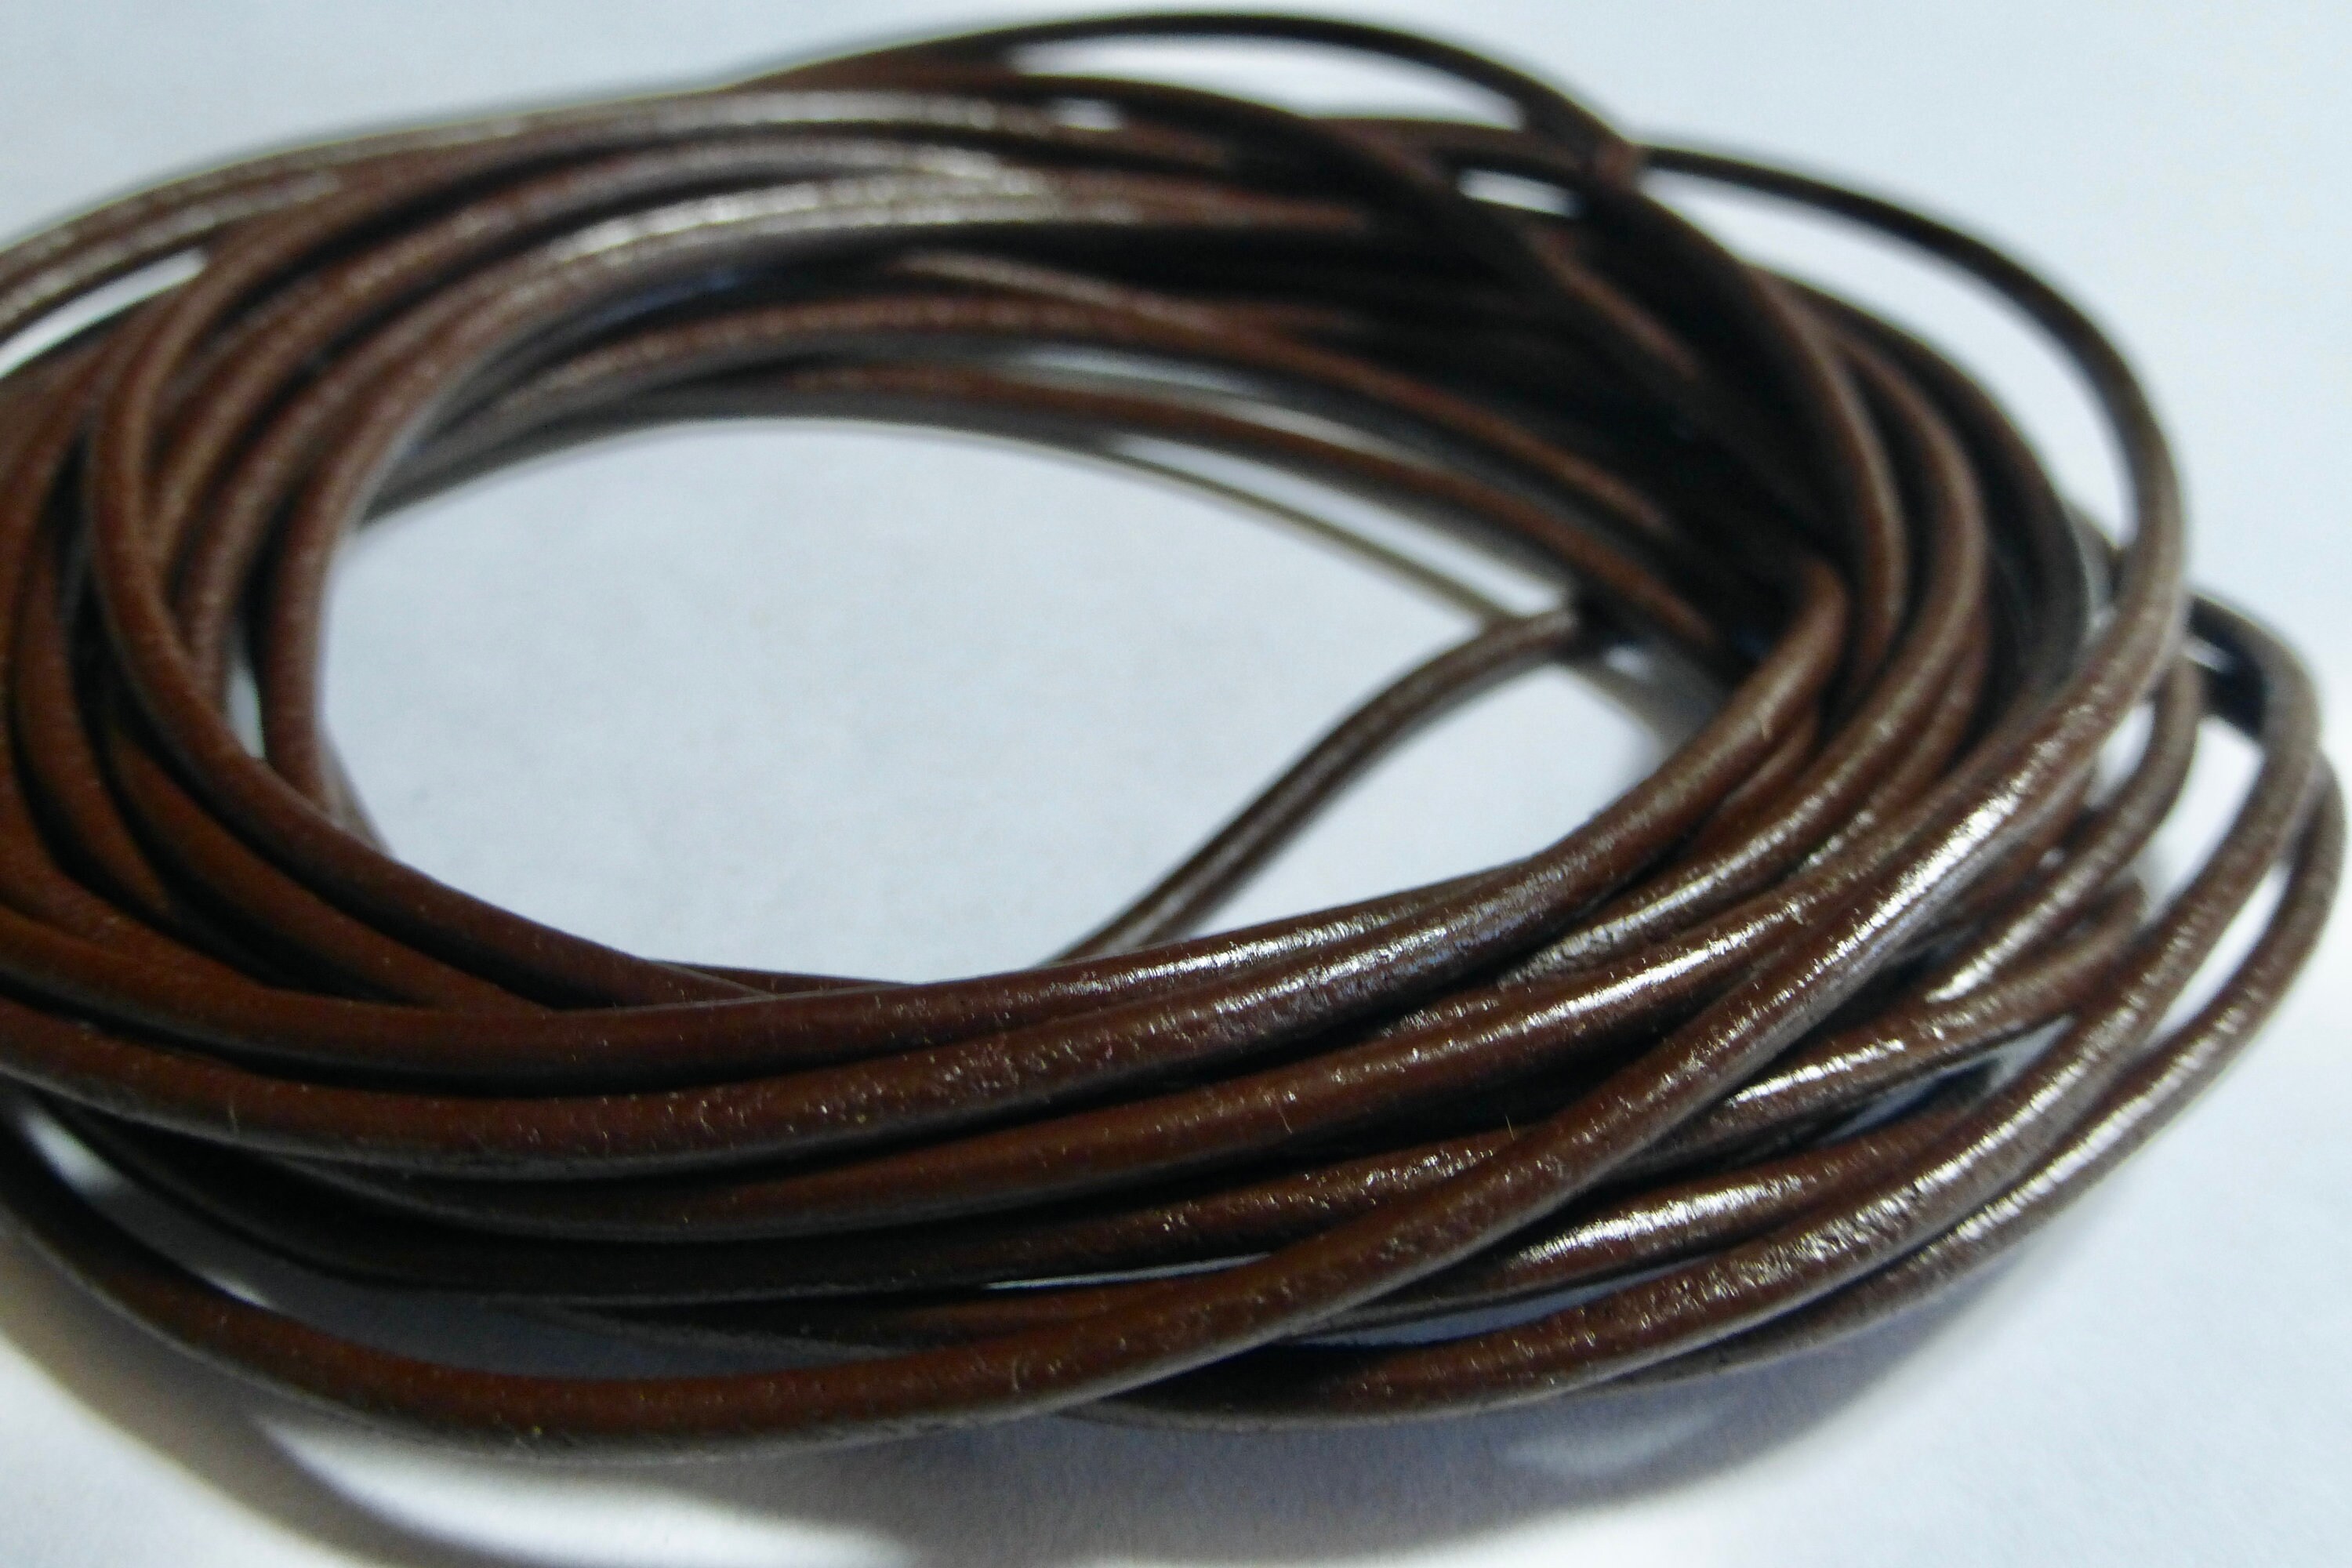  KONMAY Jewelry Real Leather Cord, 40 Yards 1.0mm Mixed Leather  String for Necklaces, Bracelets, Jewelry Making, Crafting and Braiding